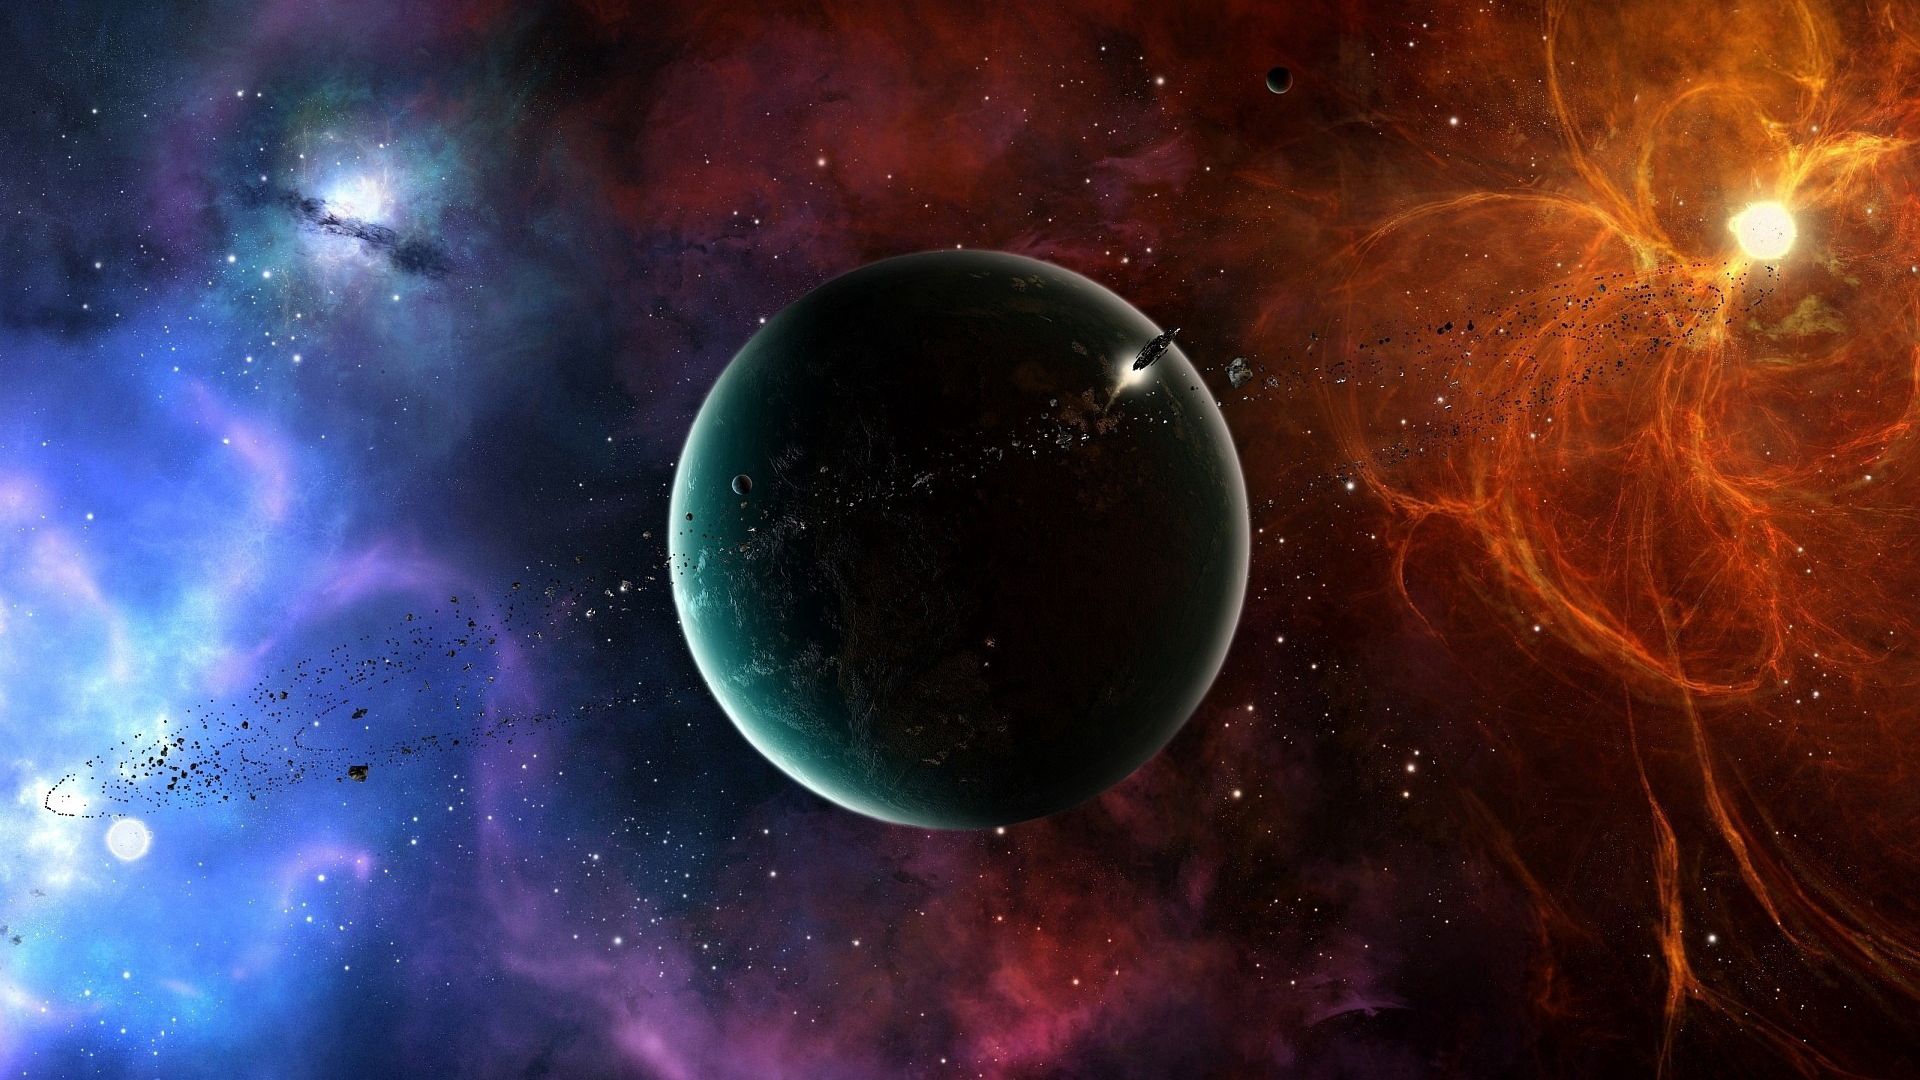 Download wallpaper 1920x1080 planet, colored, spots full hd, hdtv, fhd ...